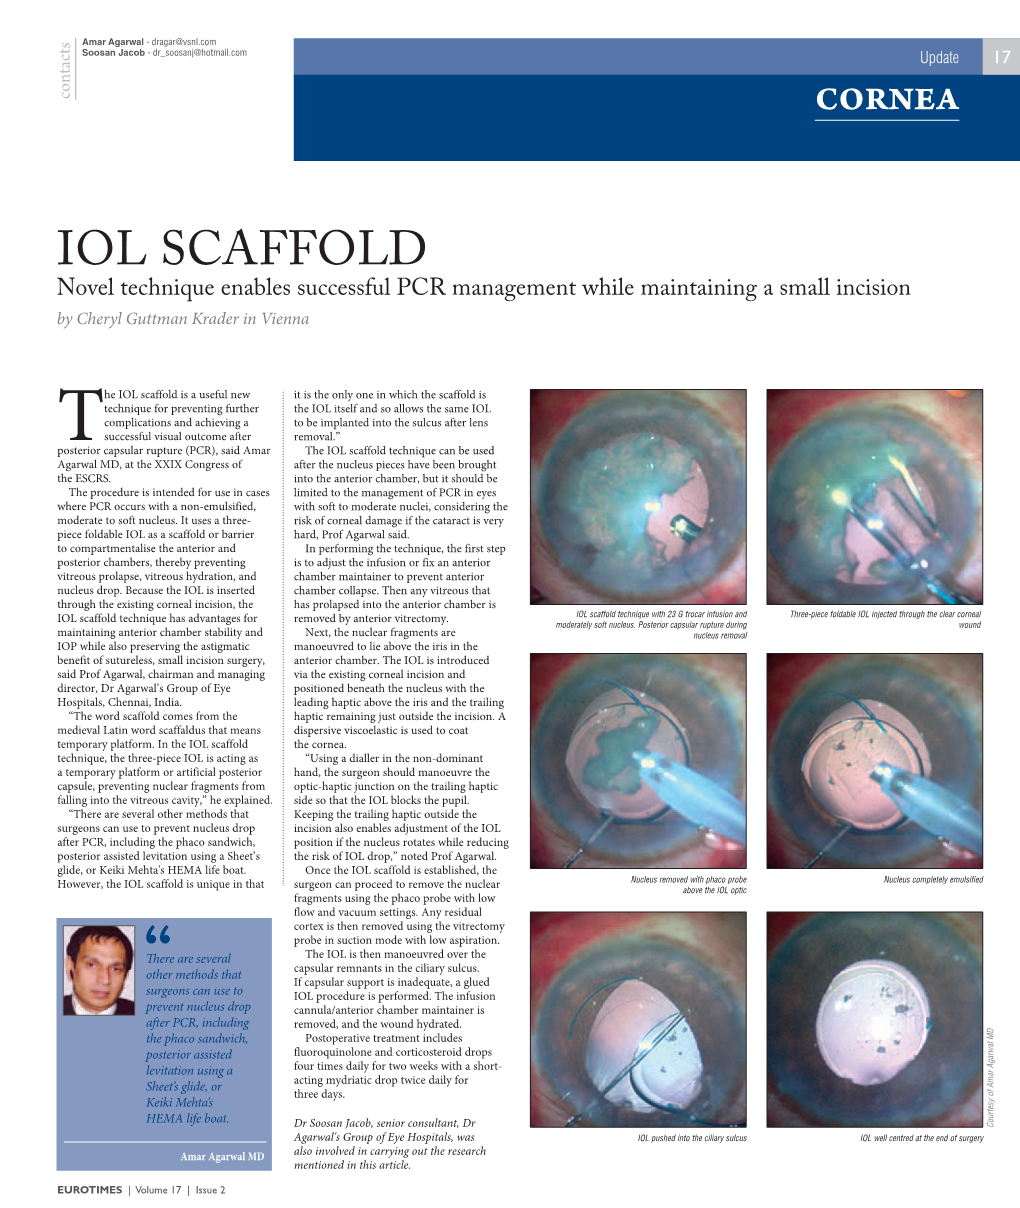 IOL SCAFFOLD Novel Technique Enables Successful PCR Management While Maintaining a Small Incision by Cheryl Guttman Krader in Vienna